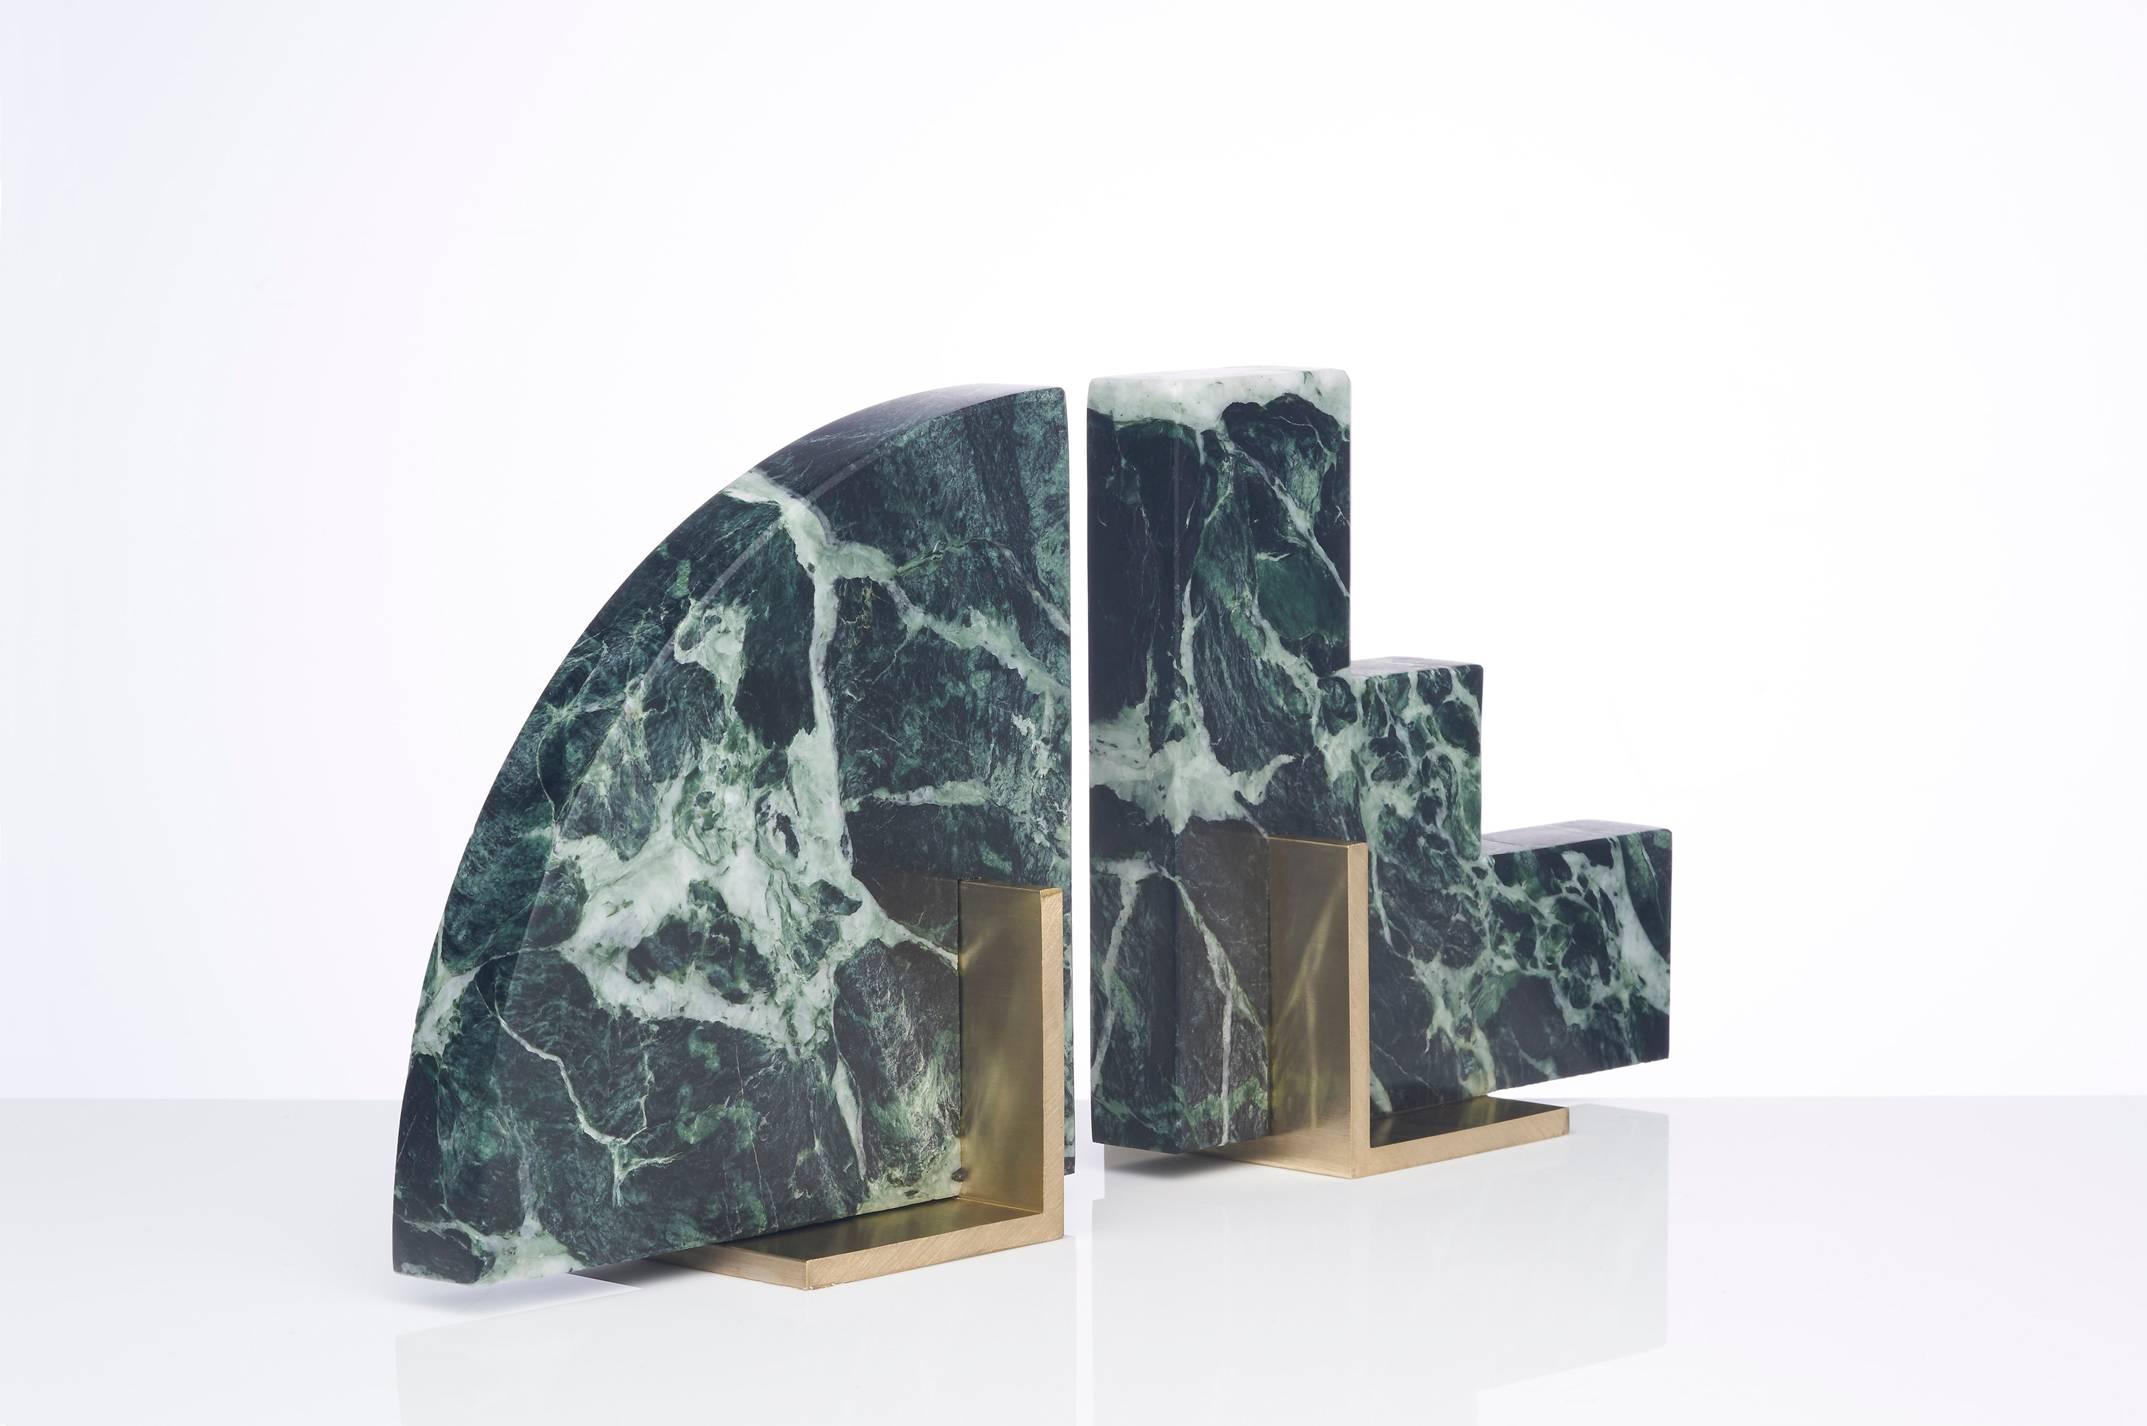 Meet Curvy and Steppy; the two individual bookends which as a pair are known as The Odd Couple Bookends.
Here shown in a honed green marble and a brushed brass base.
The marble is cut into two geometric shapes and balanced over a brass angle.
The